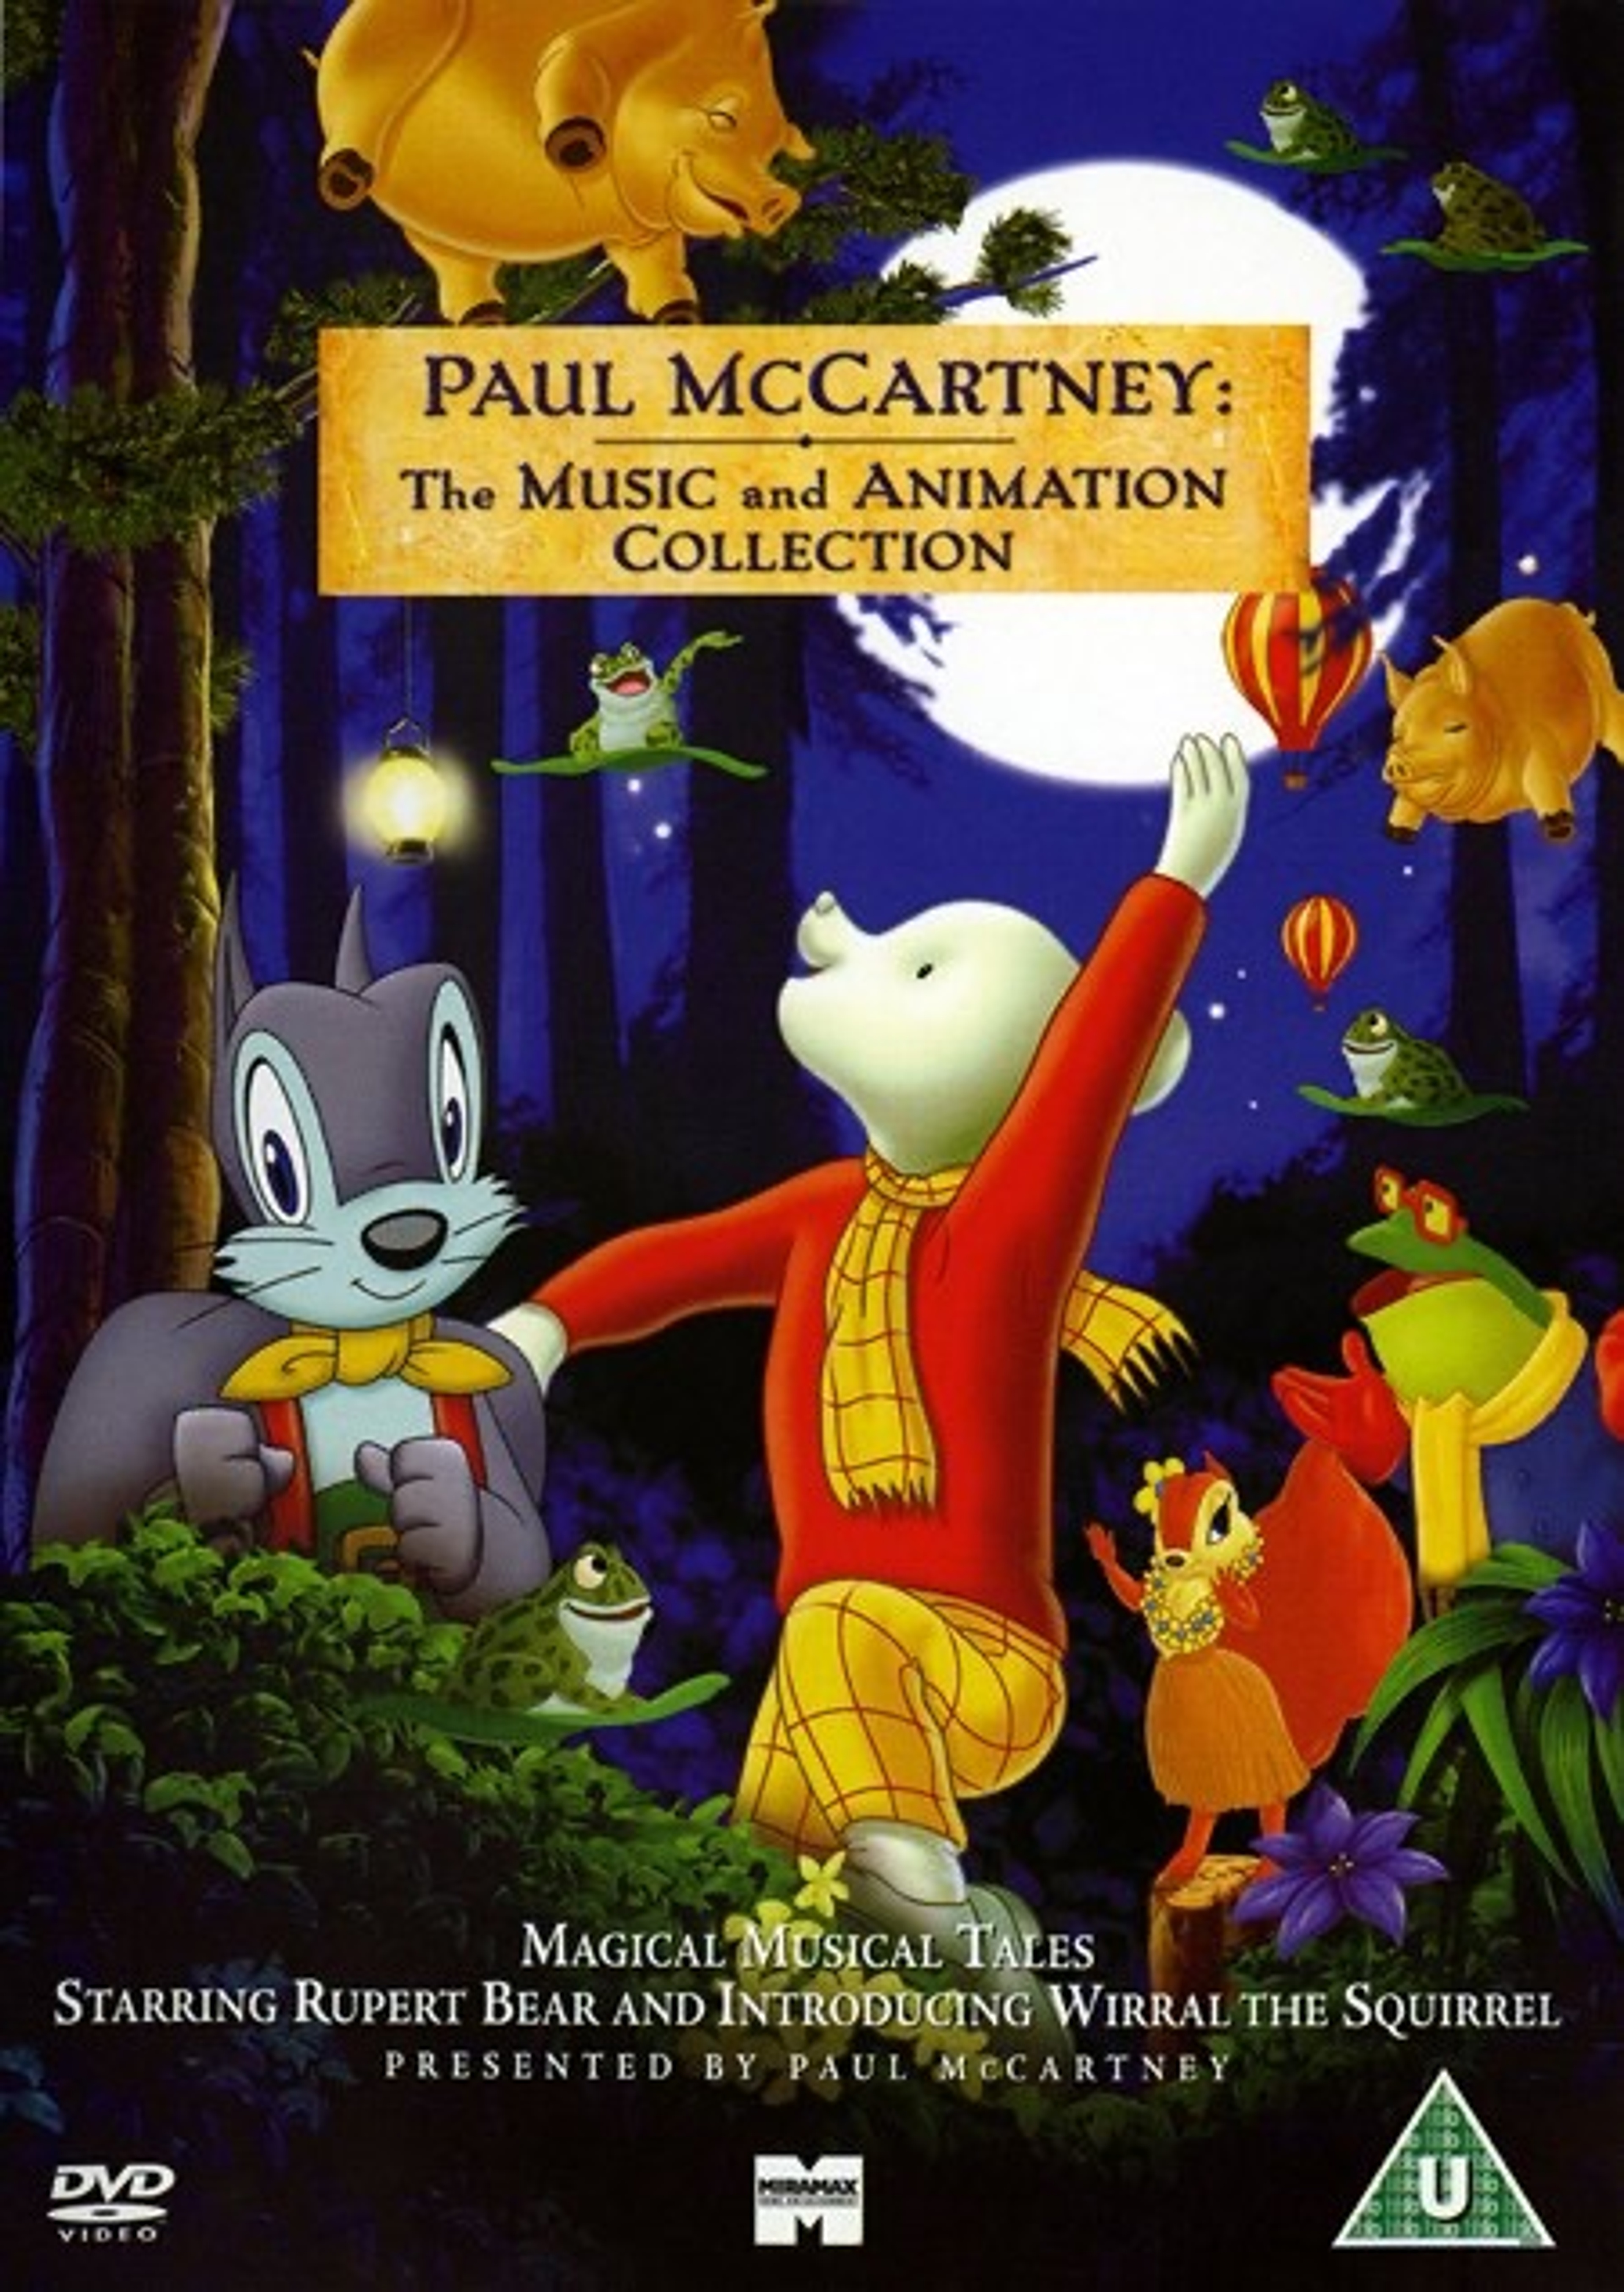 Film cover for Paul McCartney's The Music and Animation